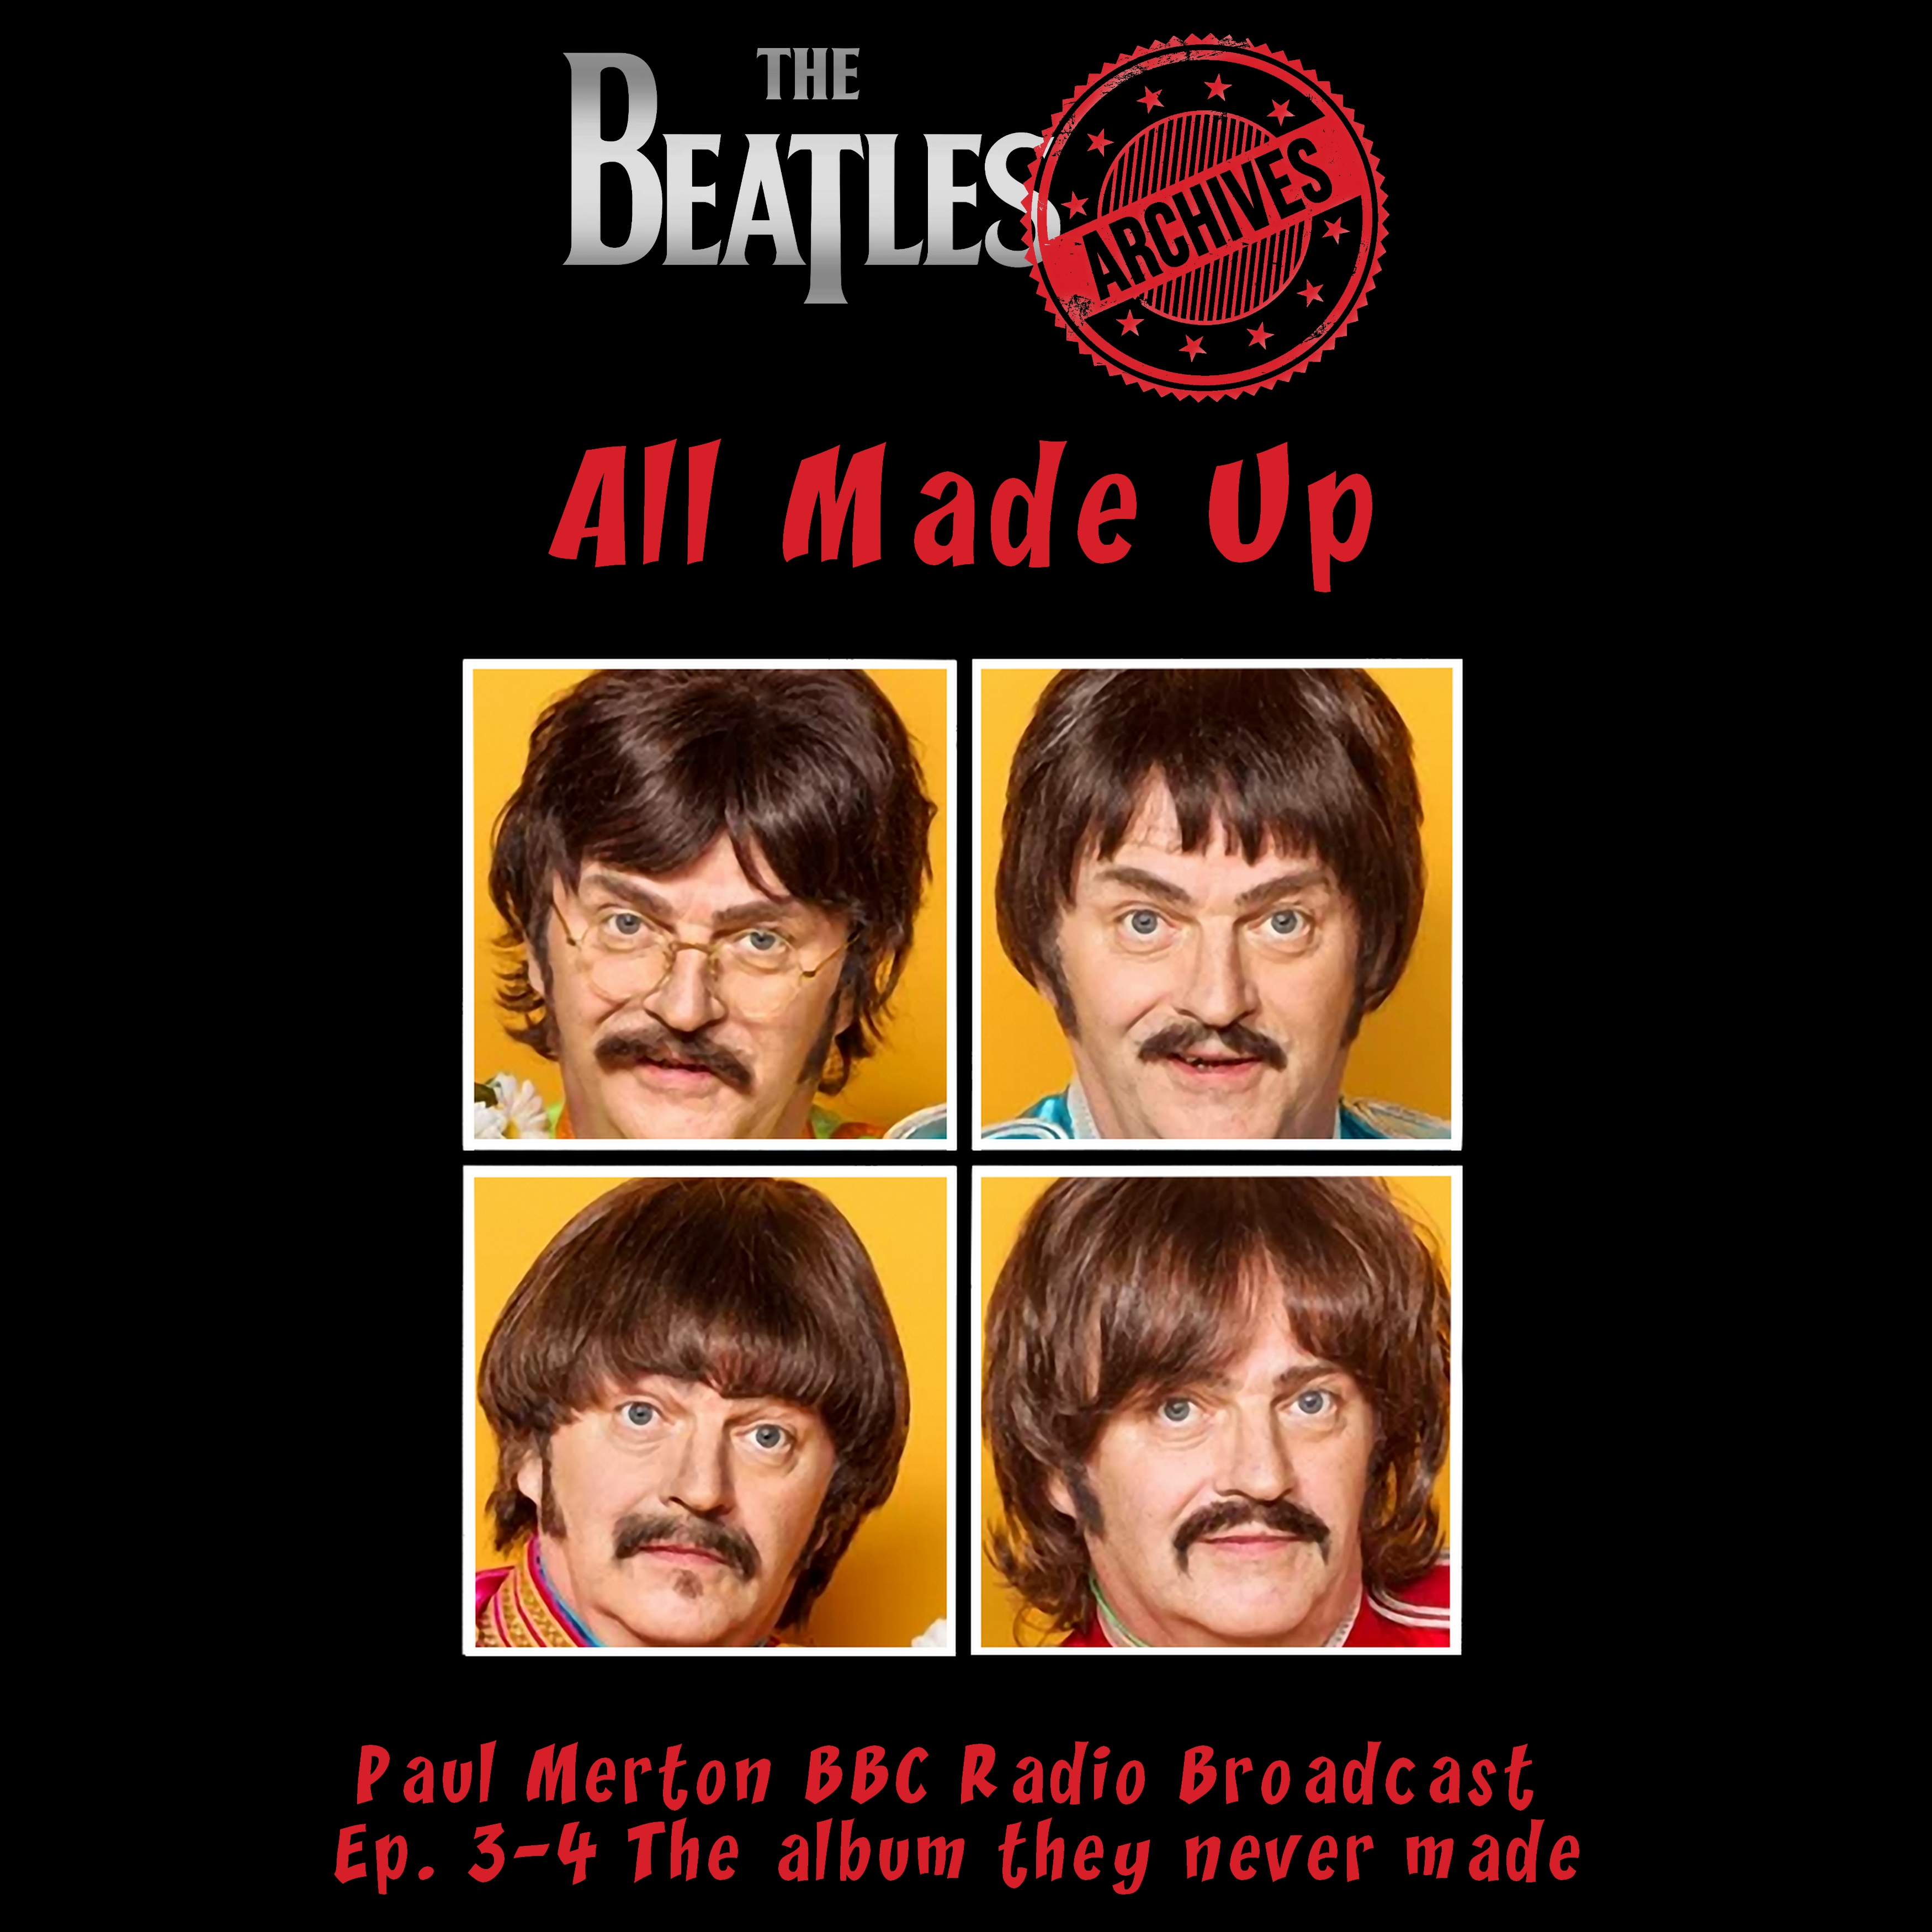 The Beatles Archives - All Made Up (The album that never was) BBC Broadcast 2017